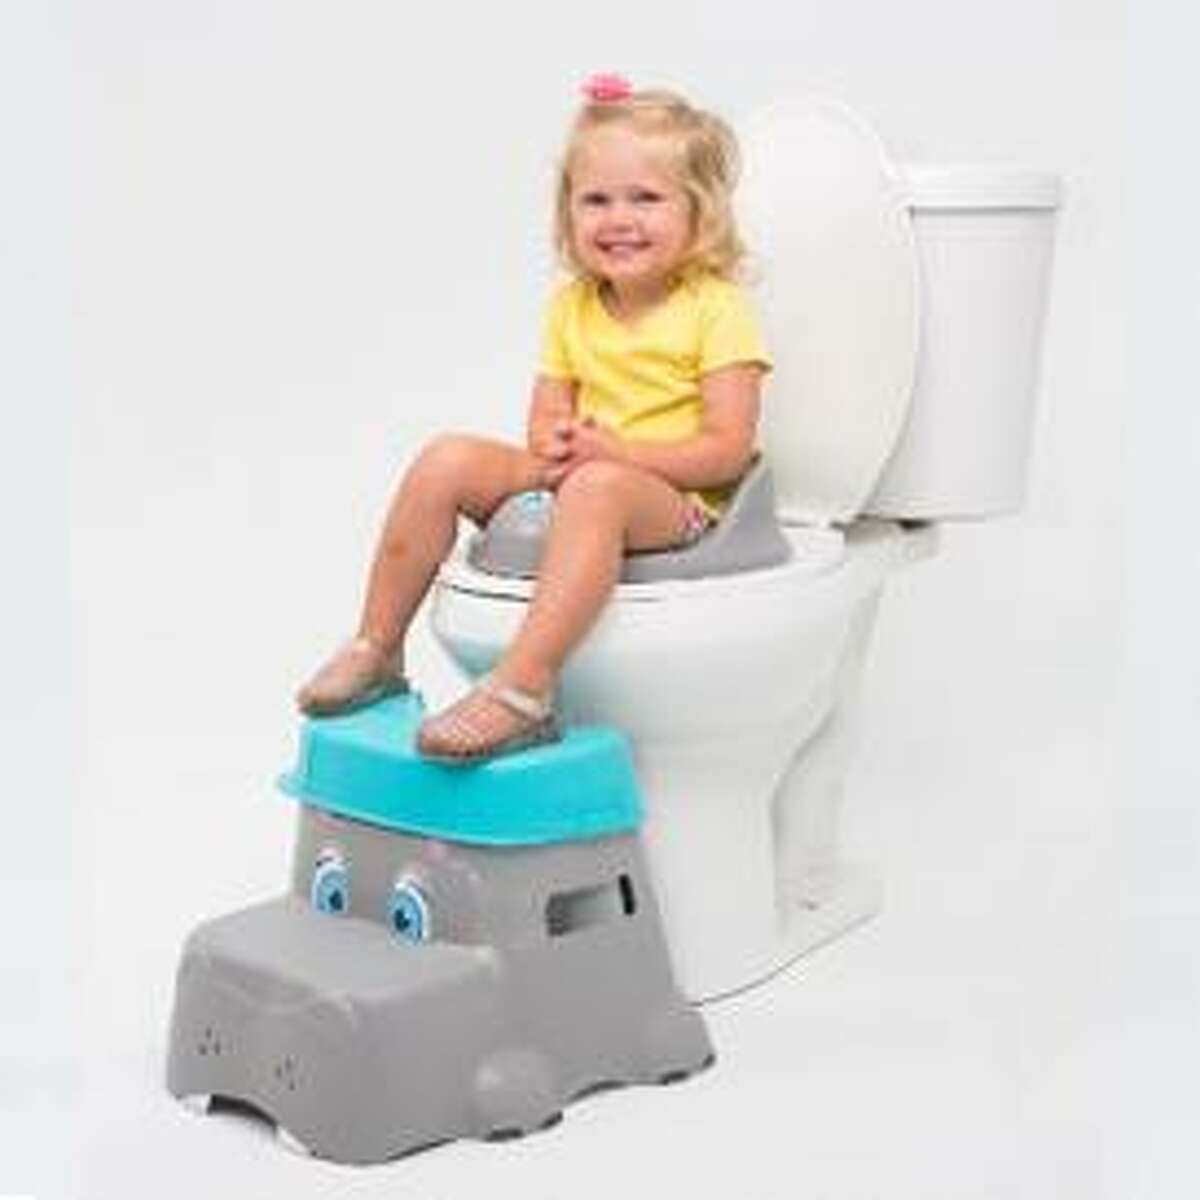 Squatty Potty is recalling about 2,400 children’s toilet step stools because the top removable step which looks like a hat can detach while a child is standing on it, posing a fall hazard. Photo courtesy of the Consumer Product Safety Commission.